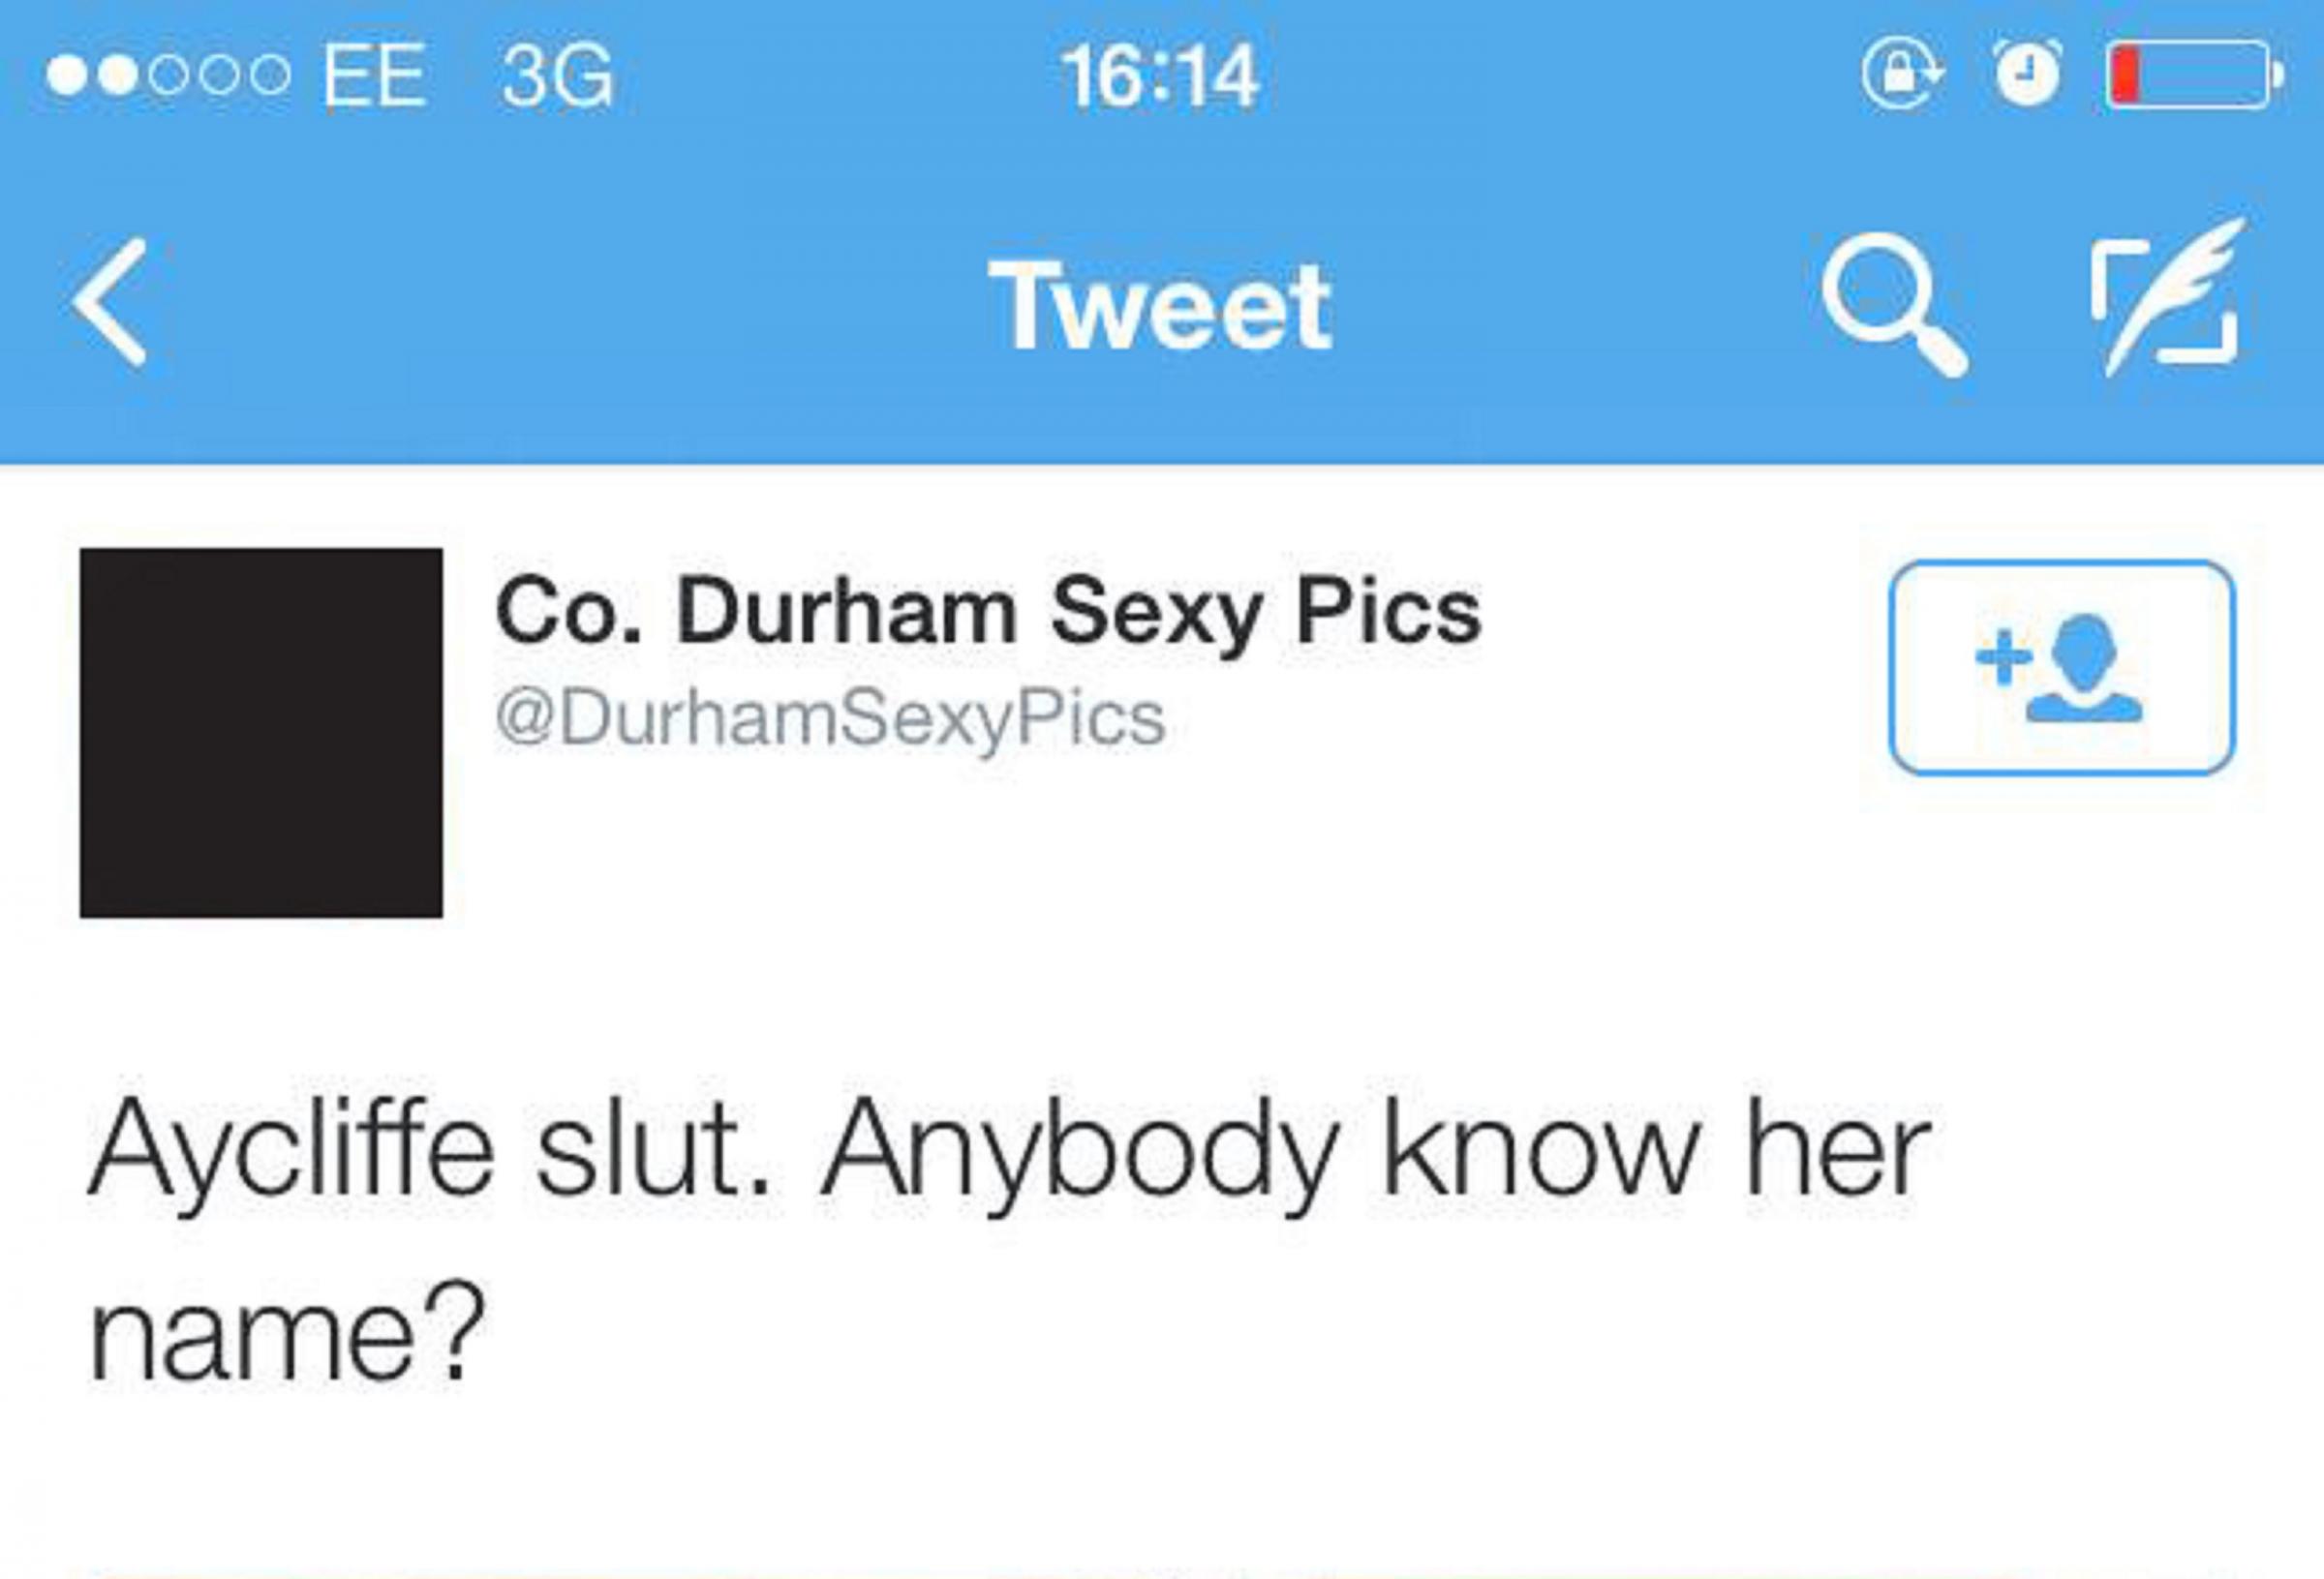 Porn pics of County Durham women appear on Twitter and police are powerless to act The Northern Echo